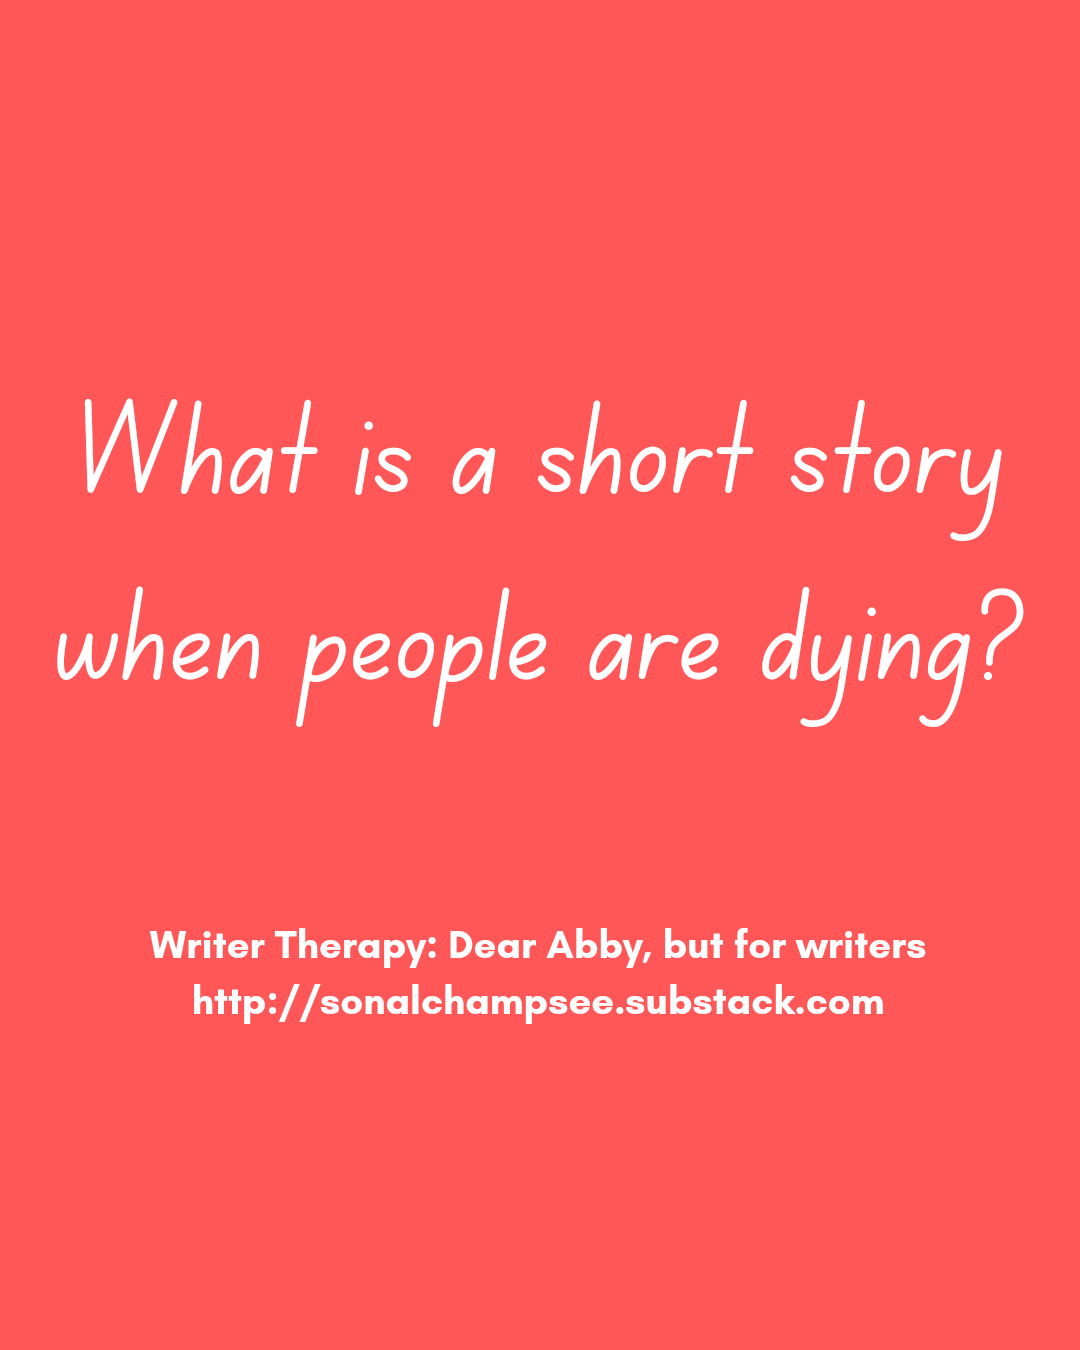 White writing on a coral background. "What is a short story when people are dying?"